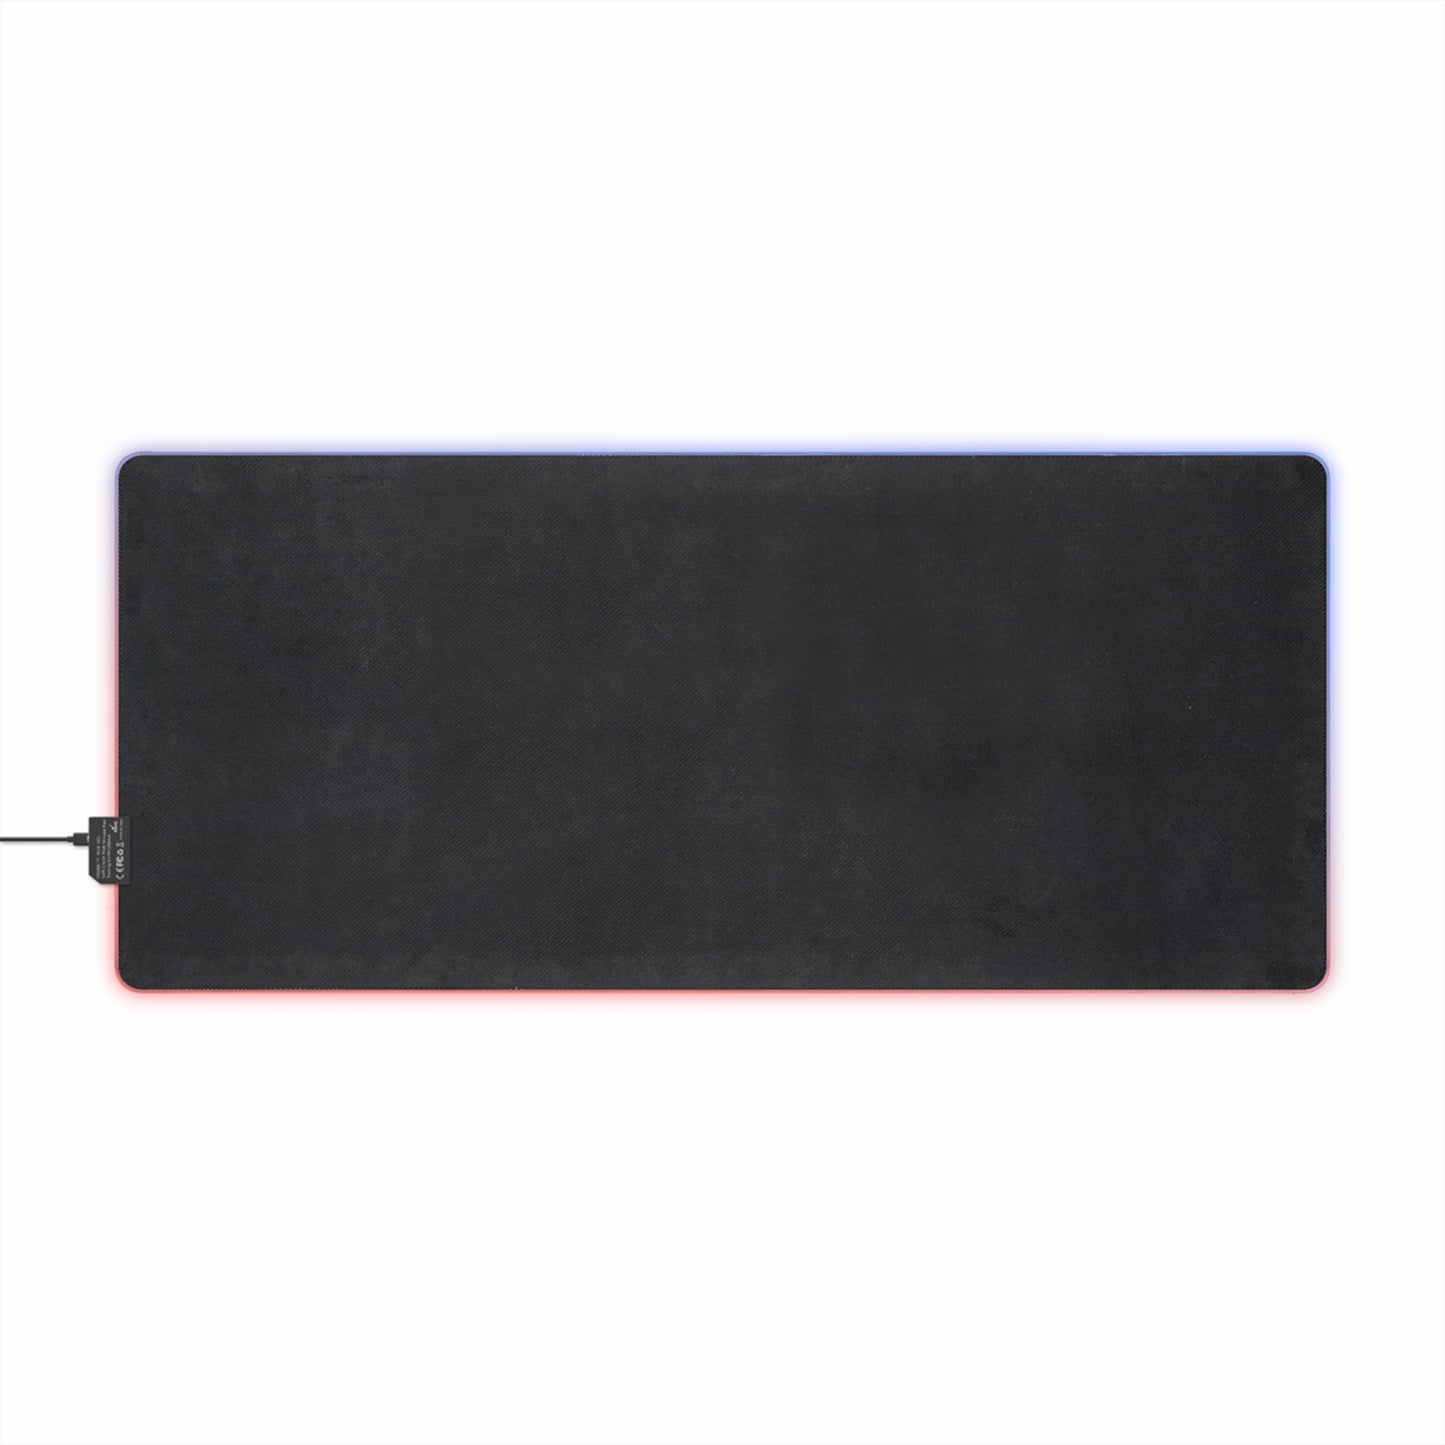 LED Gaming Mouse Pad The Bluebell 5